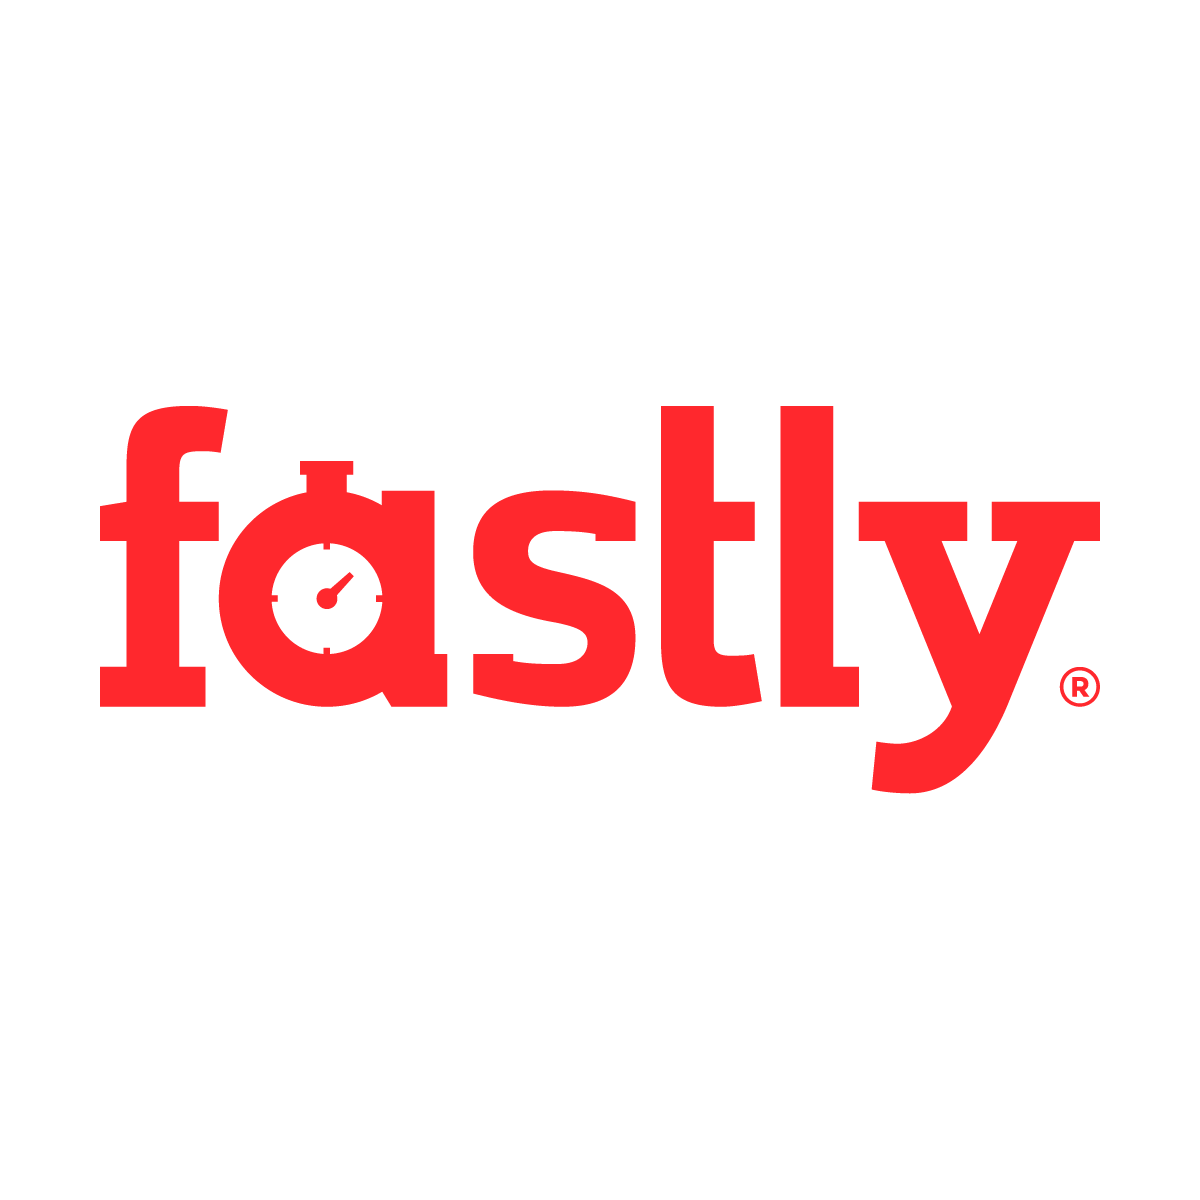 Logo of Fastly